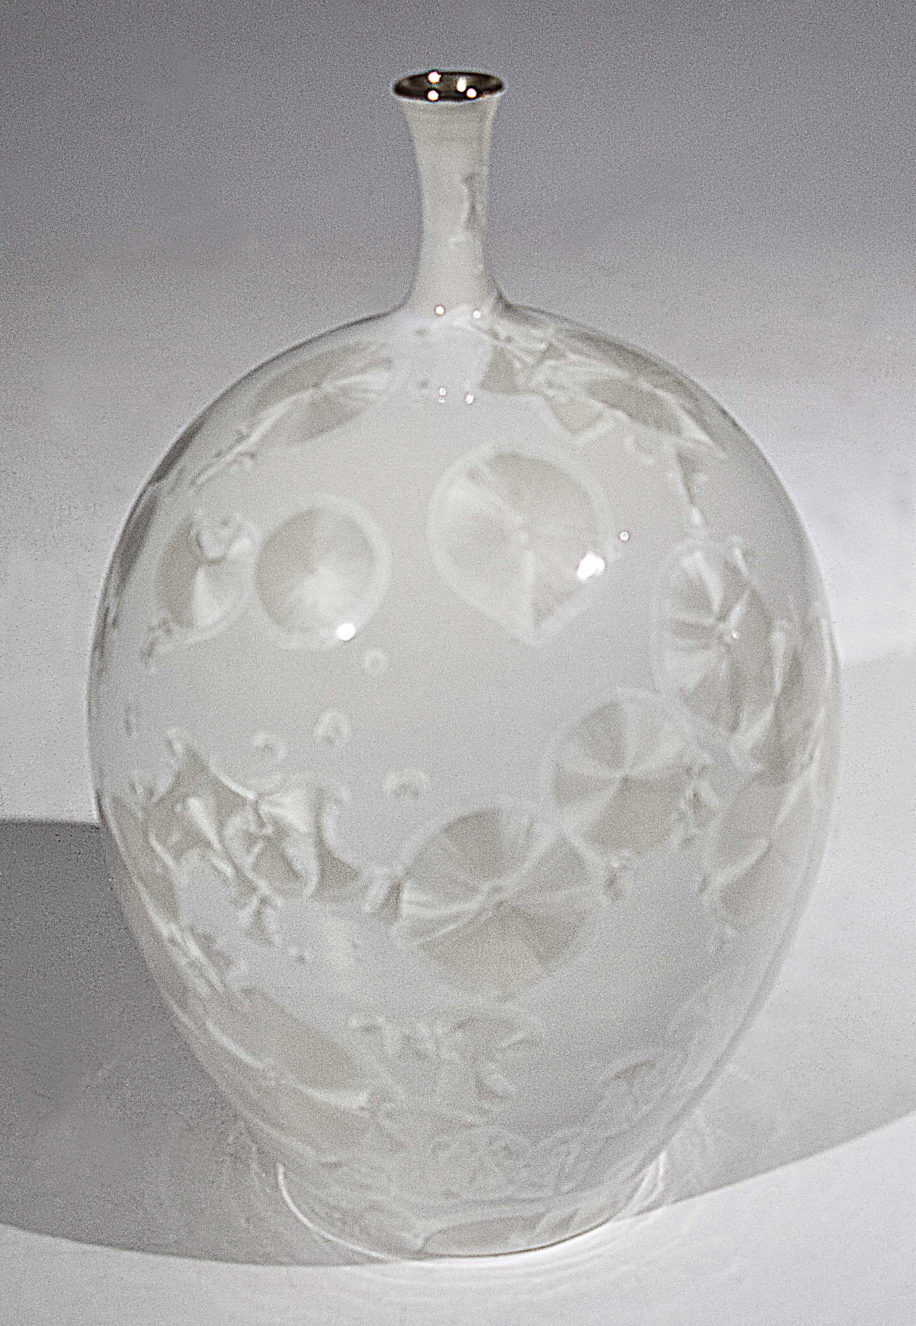 Pearl Bottle #726 by Bill Boyd at The Avenue Gallery, a contemporary fine art gallery in Victoria, BC, Canada.